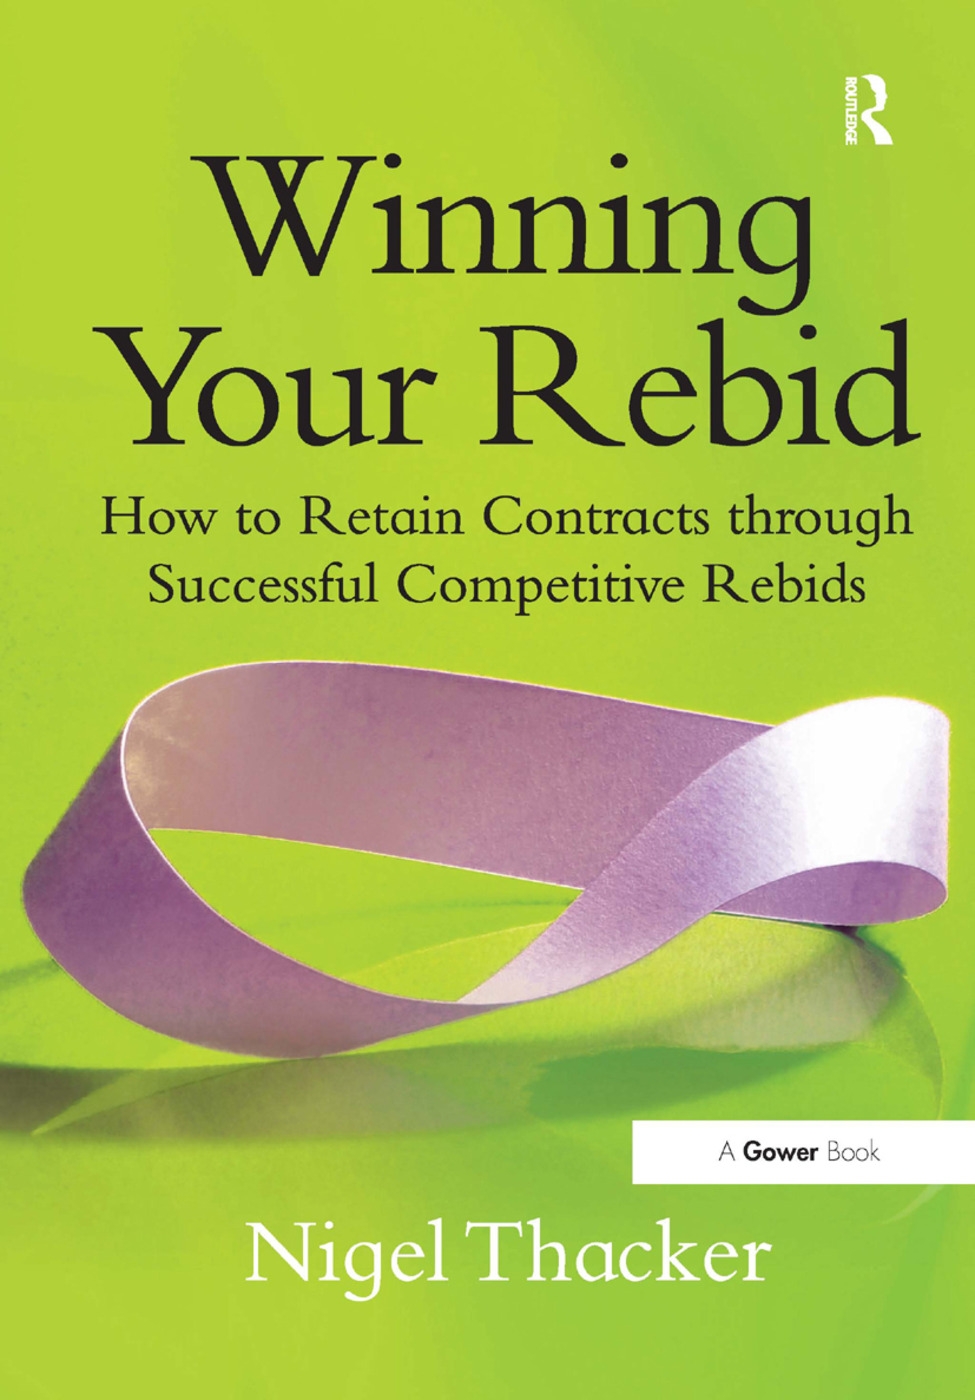 Winning Your Rebid: How to Retain Contracts Through Successful Competitive Rebids